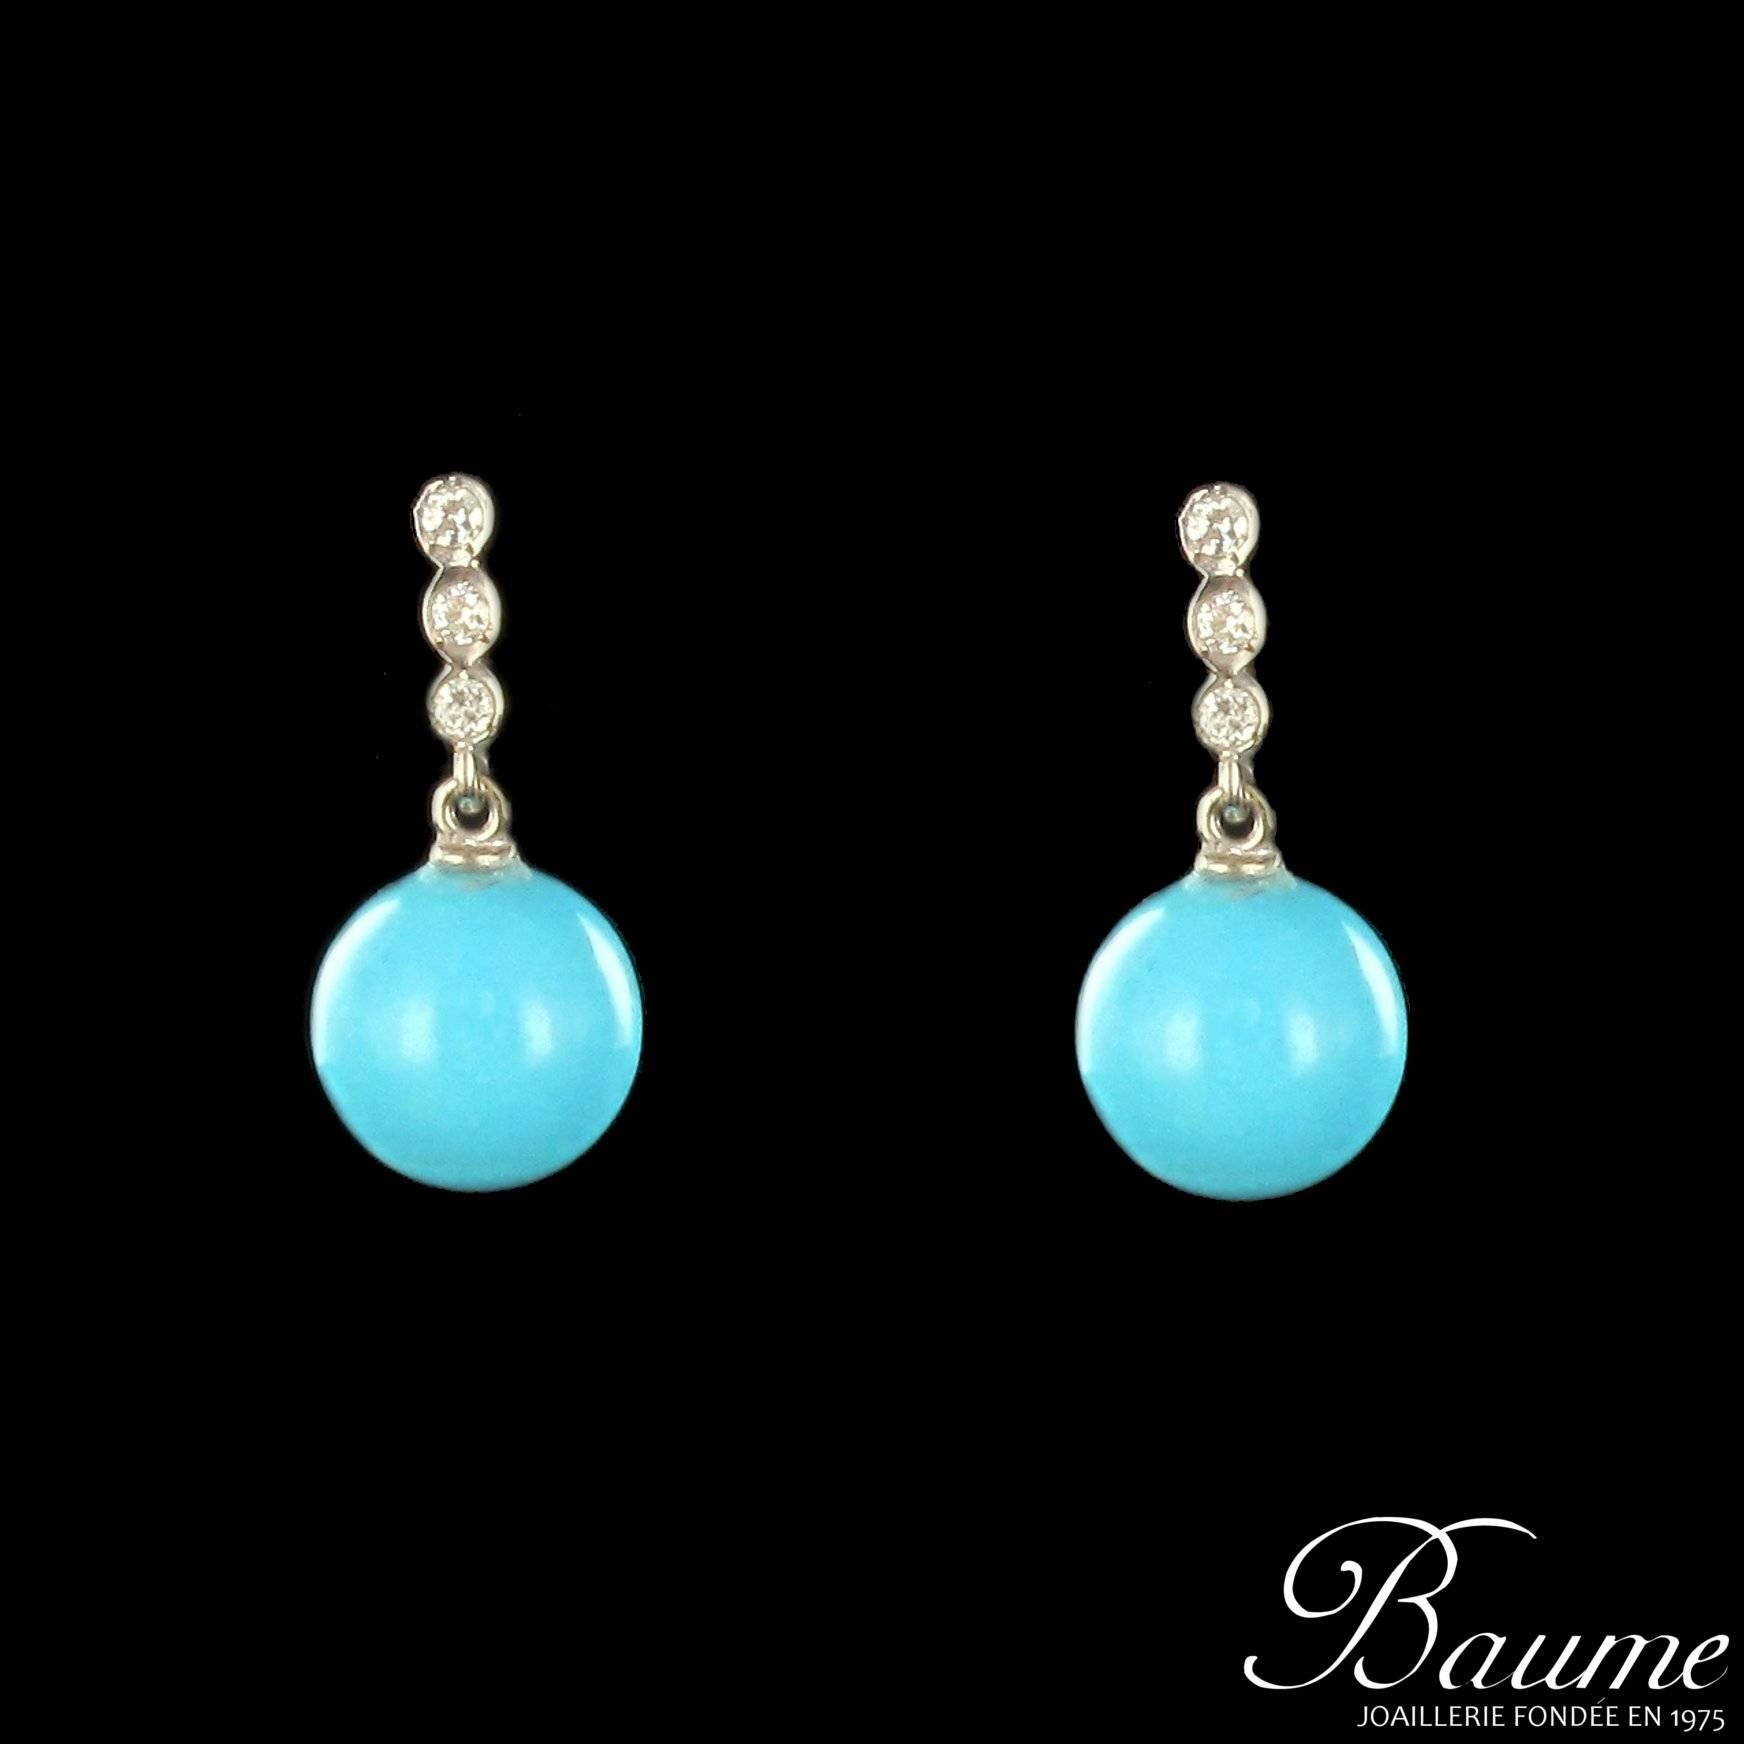 For pierced ears. Pair of 18K white gold earrings.  

They are each decorated with a line of 3 diamonds closed at their base a turquoise bead. Fixing is by alpa system.

Total weight of diamonds: 0.12 carat approximately,  turquoise diameter: